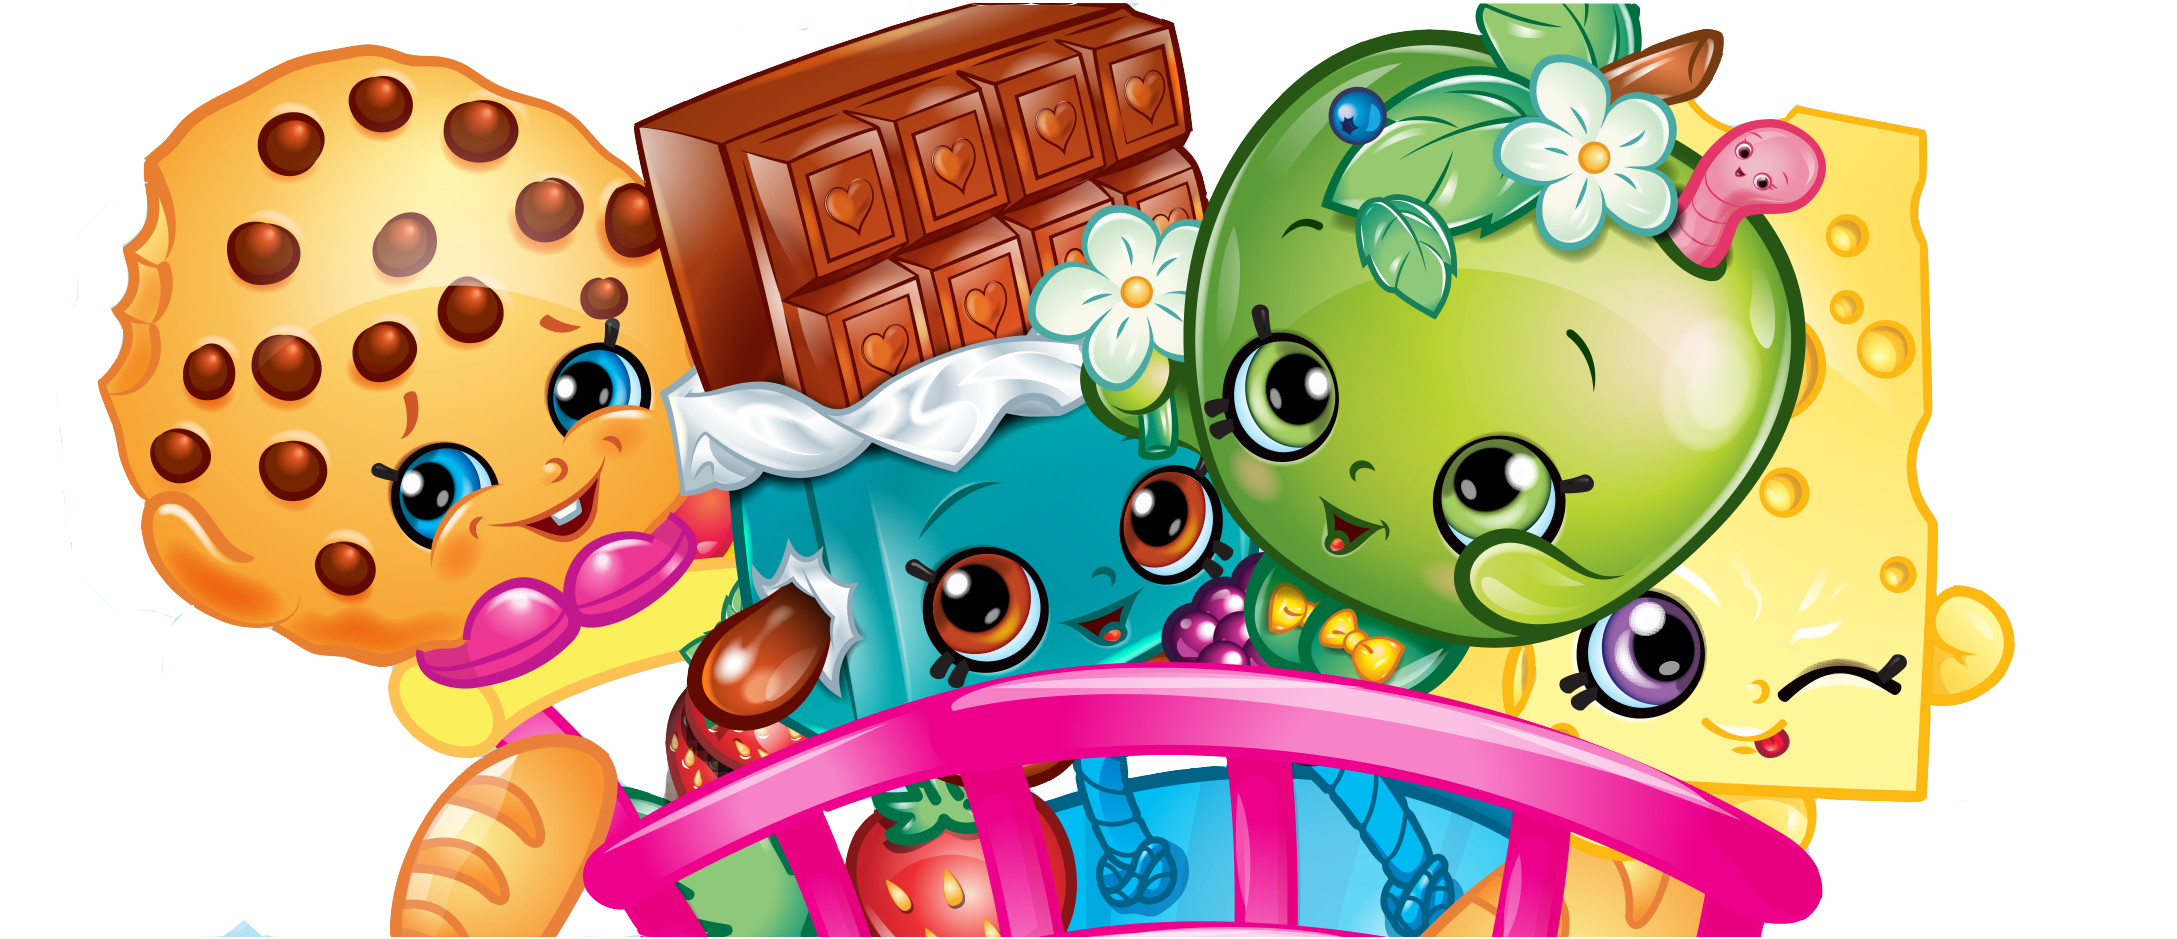 Four More For Sign Up Shopkins